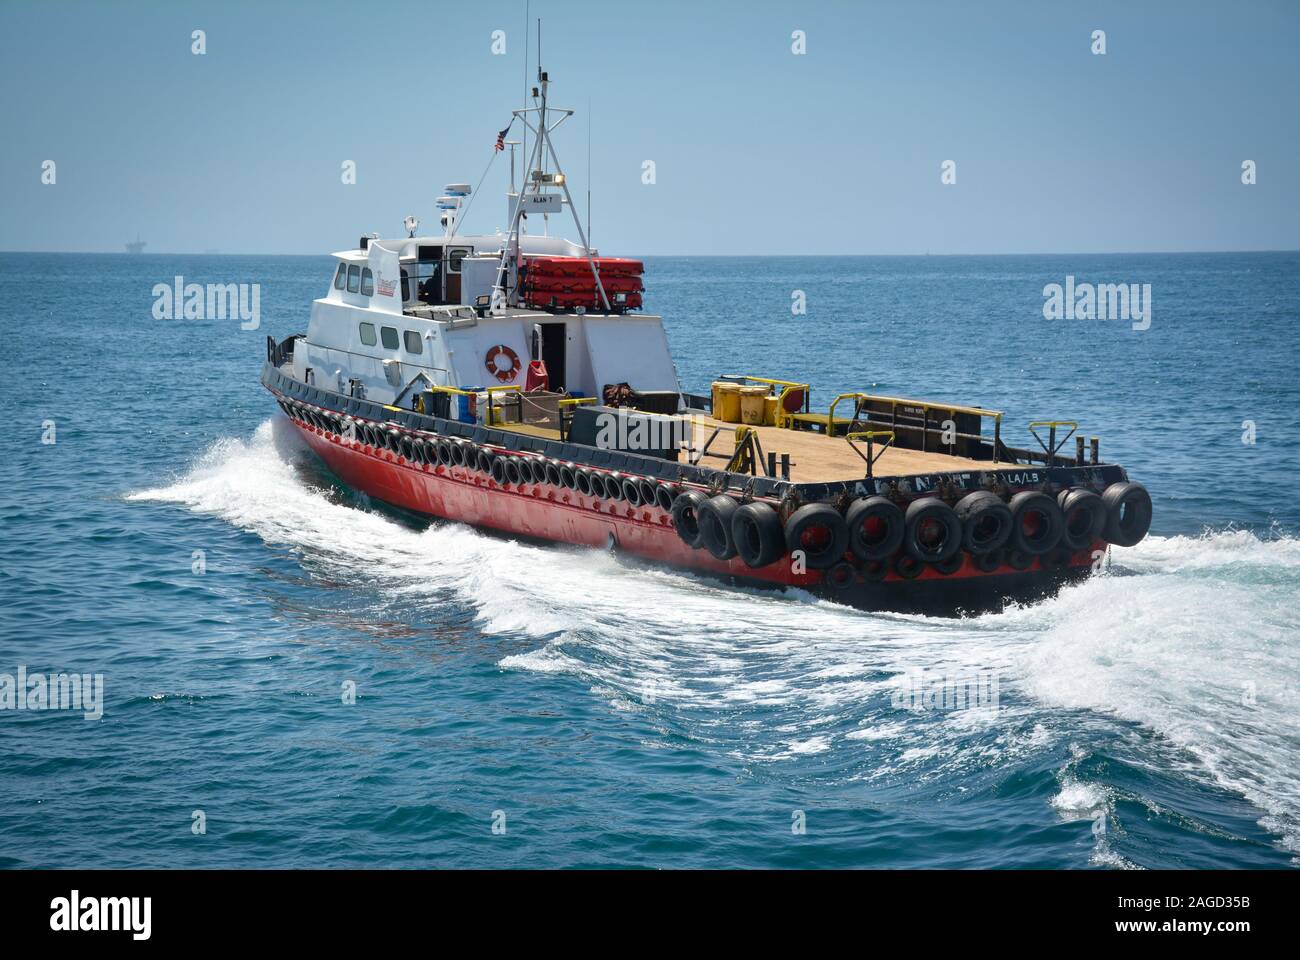 A 100 ft triple diesel screw aluminum crew boat, the 'Alan T', a So Cal Ship Services boat, leaving the Santa Barbara harbor towards the Pacific Ocean Stock Photo